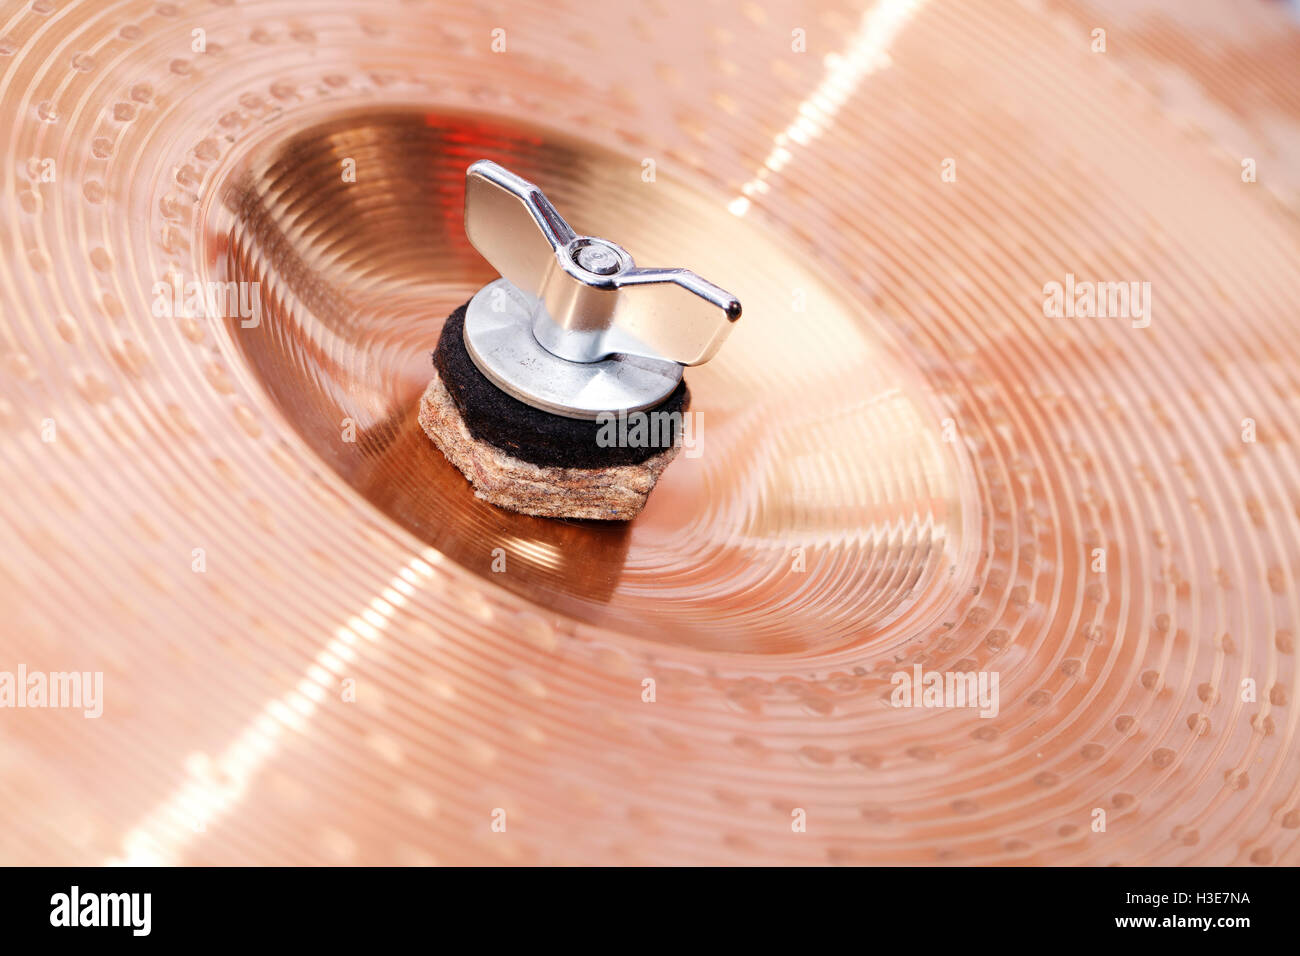 drums  cymbals  close-up  background  music, instruments percussion Stock Photo